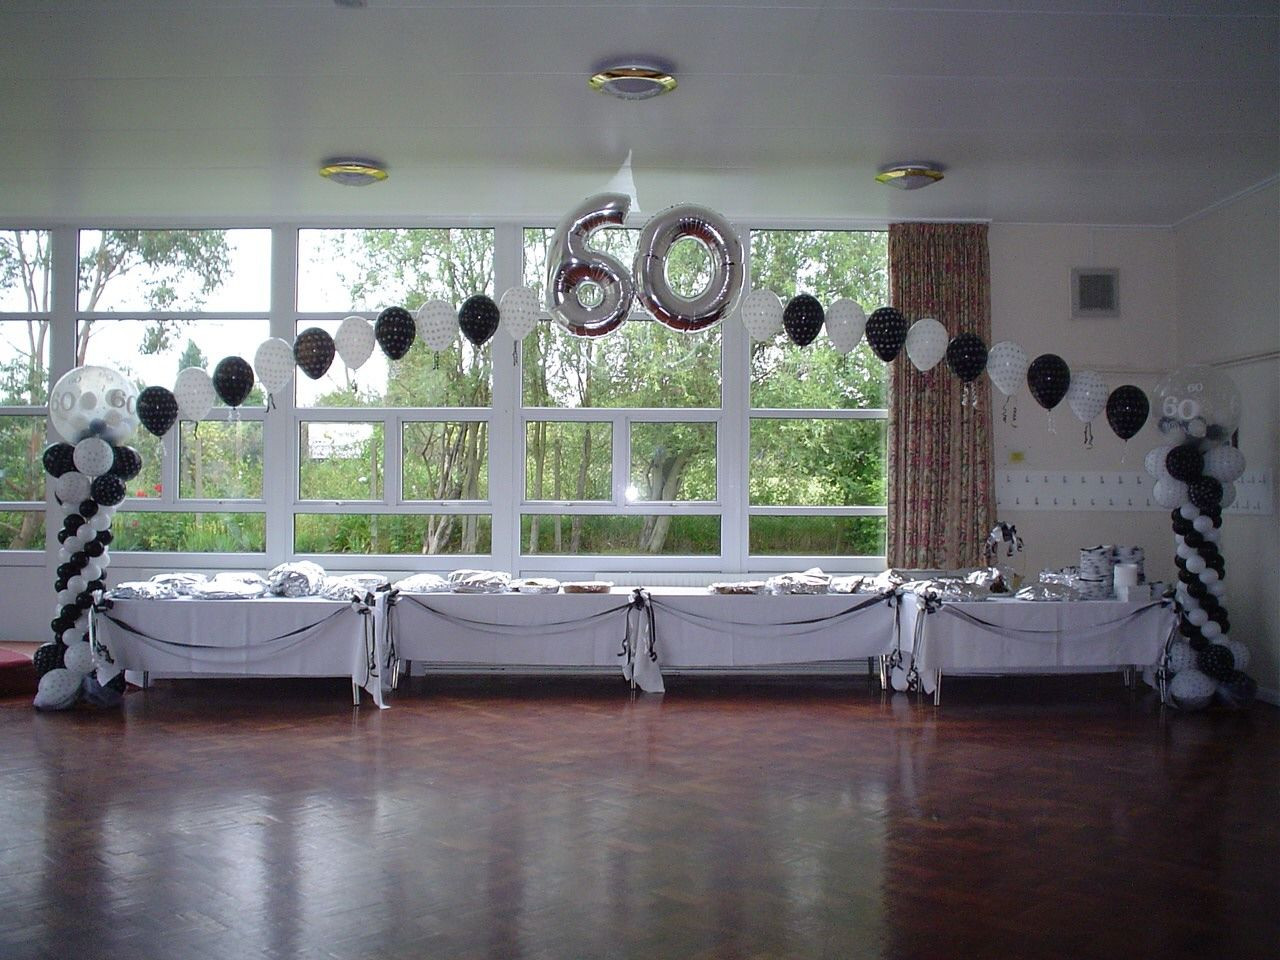 60th Birthday Decor Ideas
 Image detail for you so much for the lovely balloons for